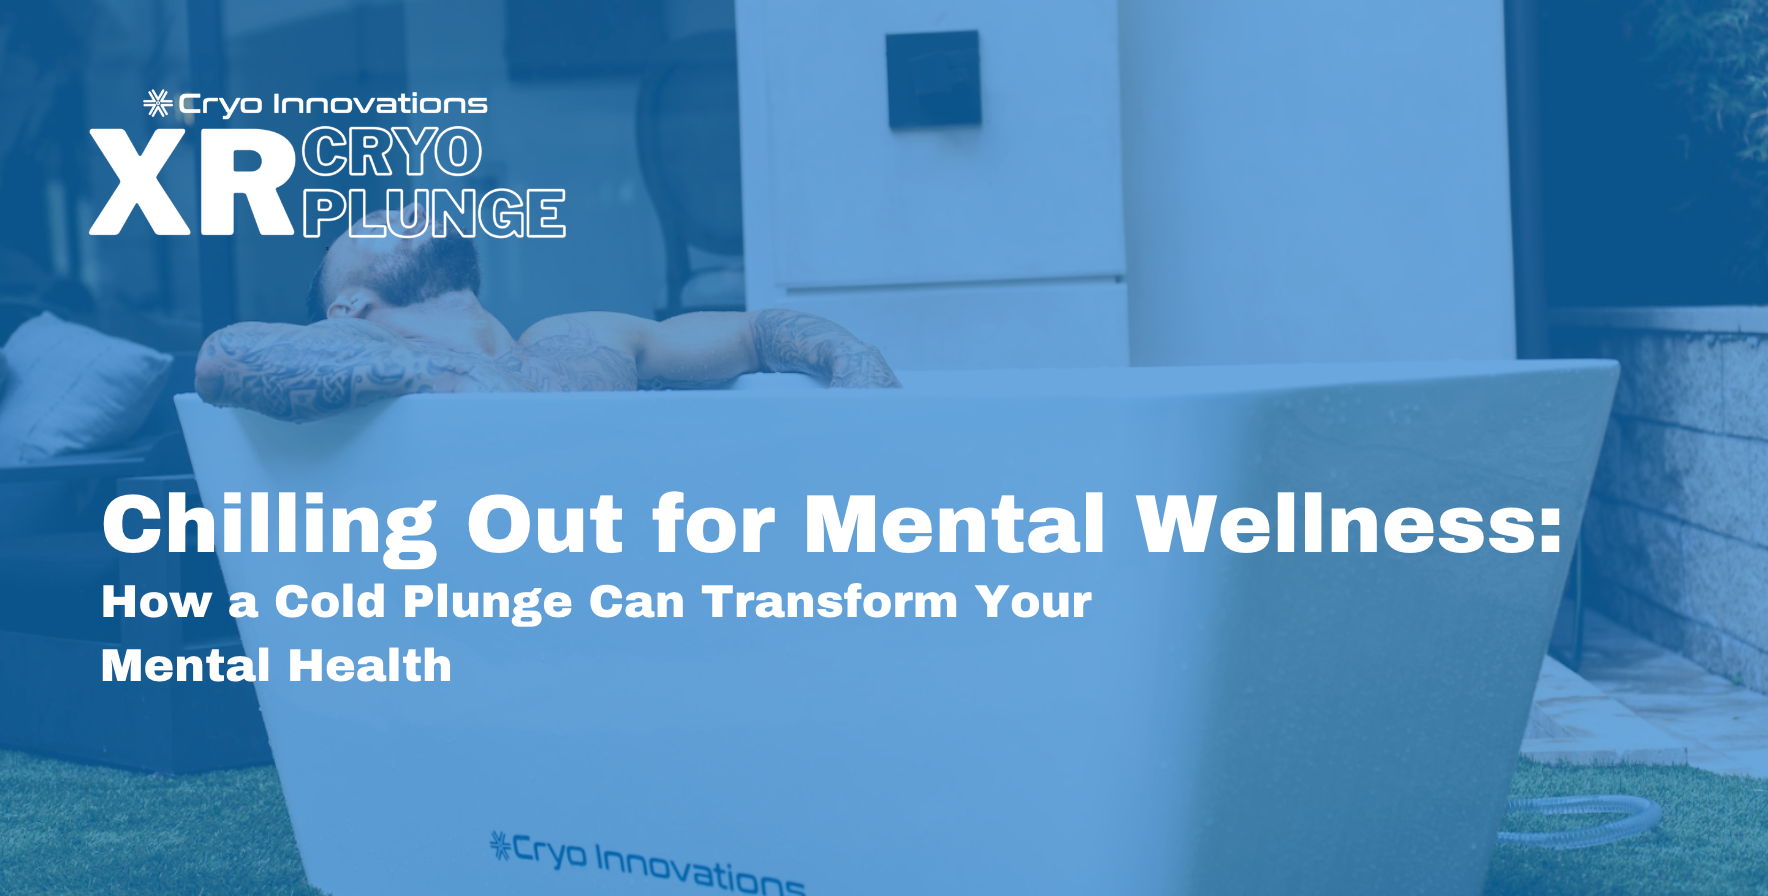 Chilling Out for Mental Wellness: How a Cold Plunge Can Transform Your Mental Health